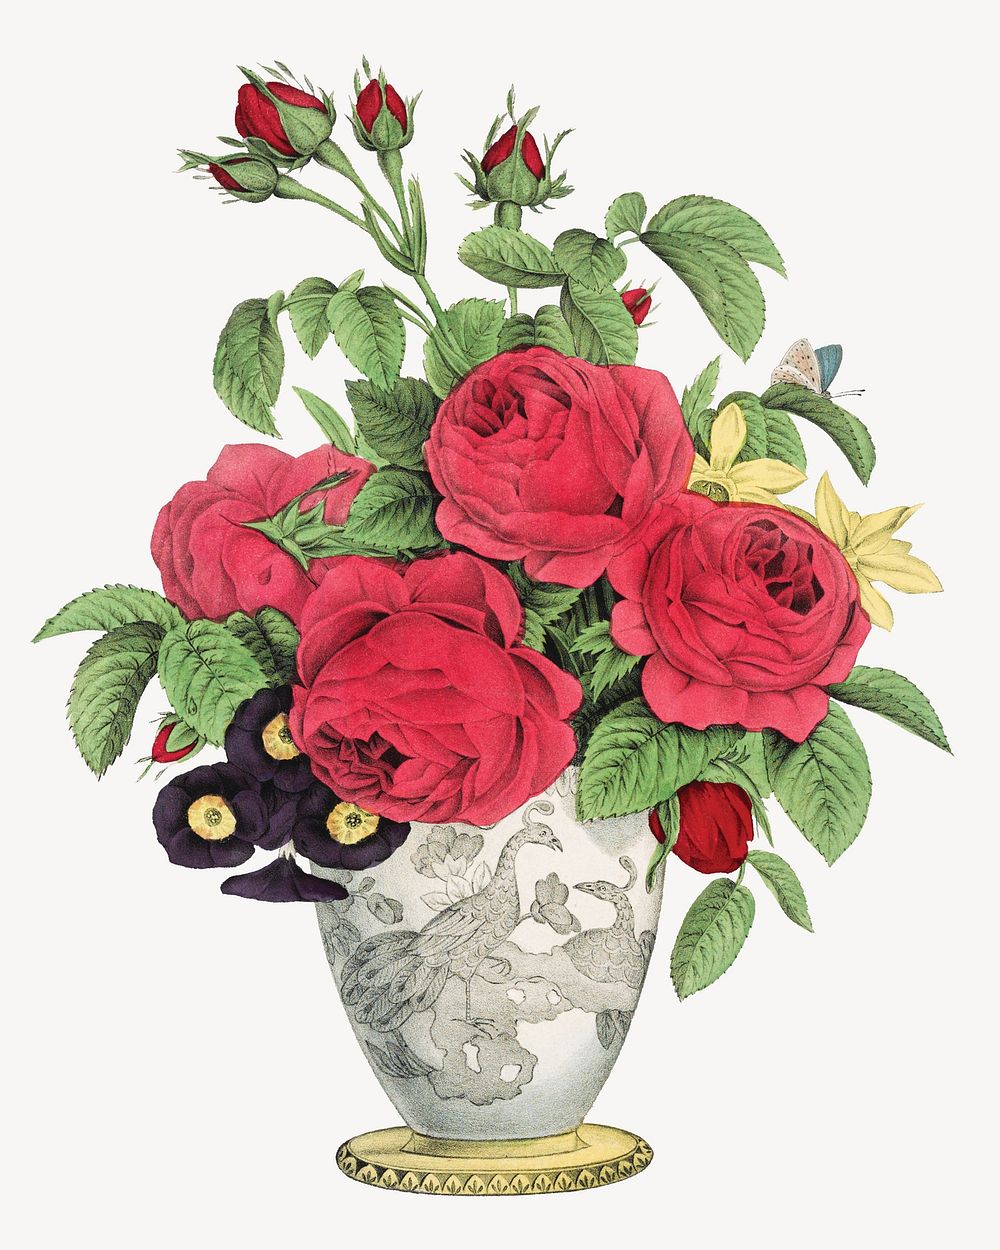 Aesthetic rose vase illustration.  Remastered by rawpixel